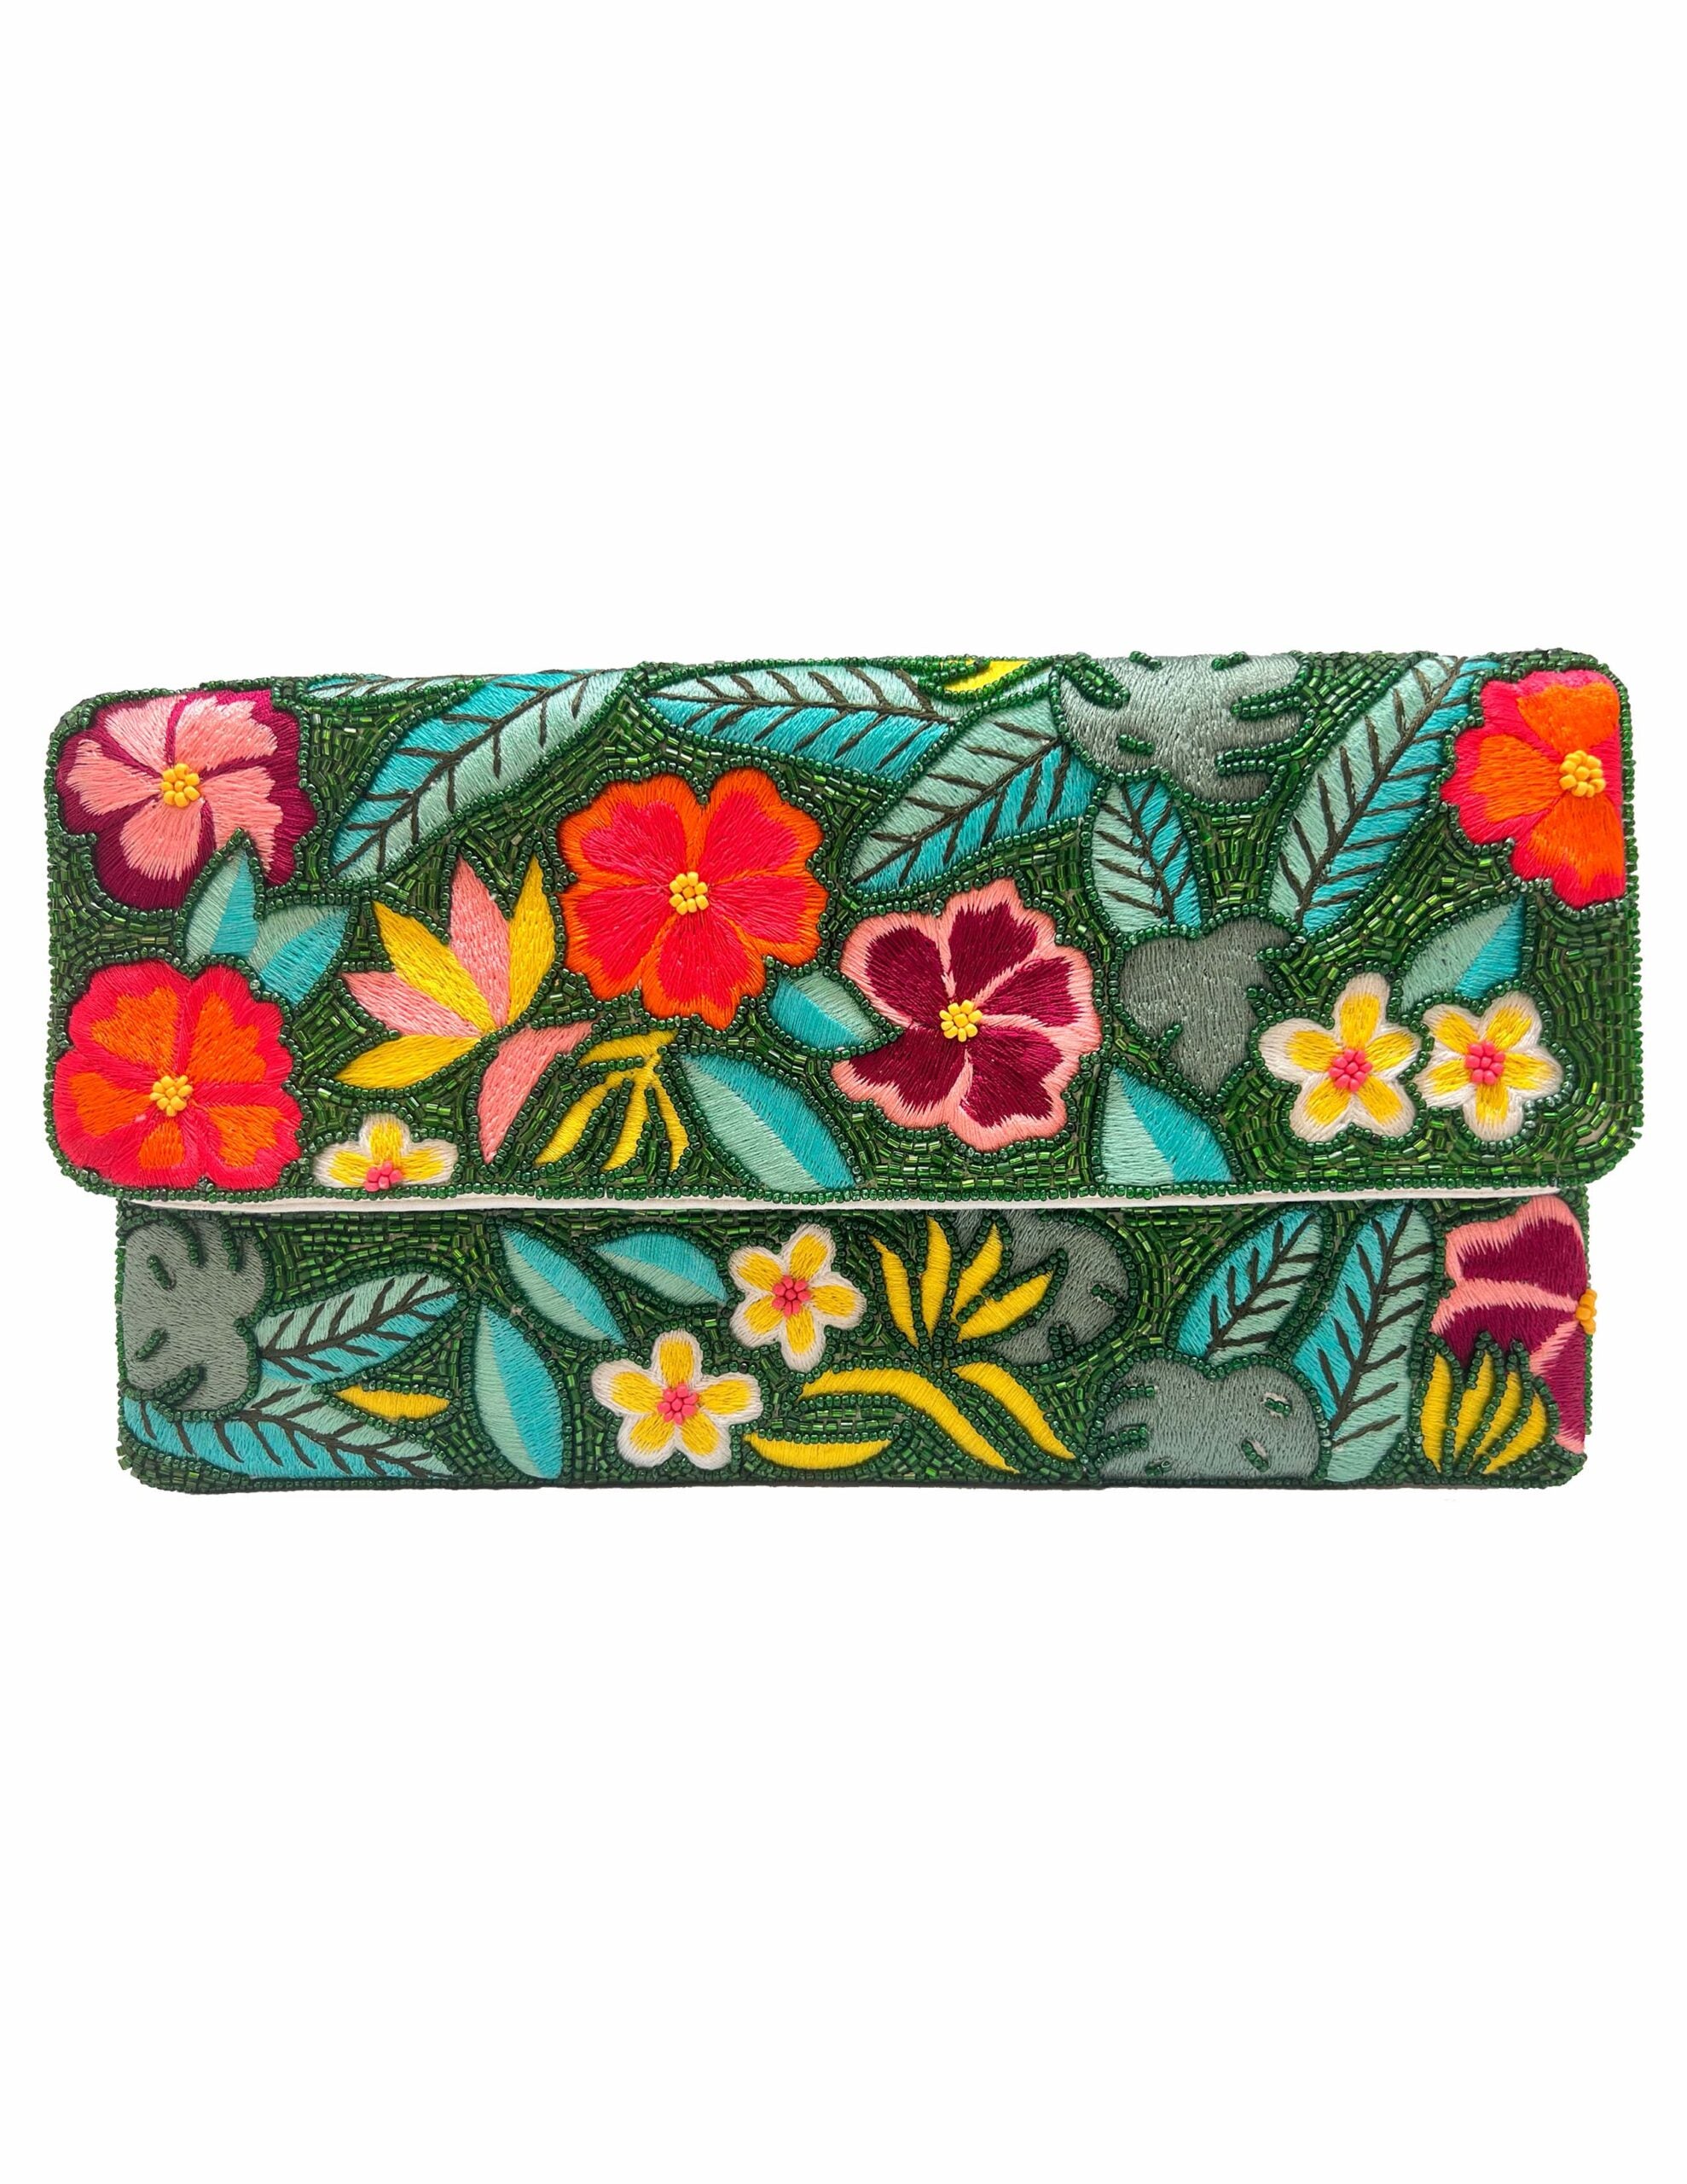 Tropical Green Floral Beaded Clutch